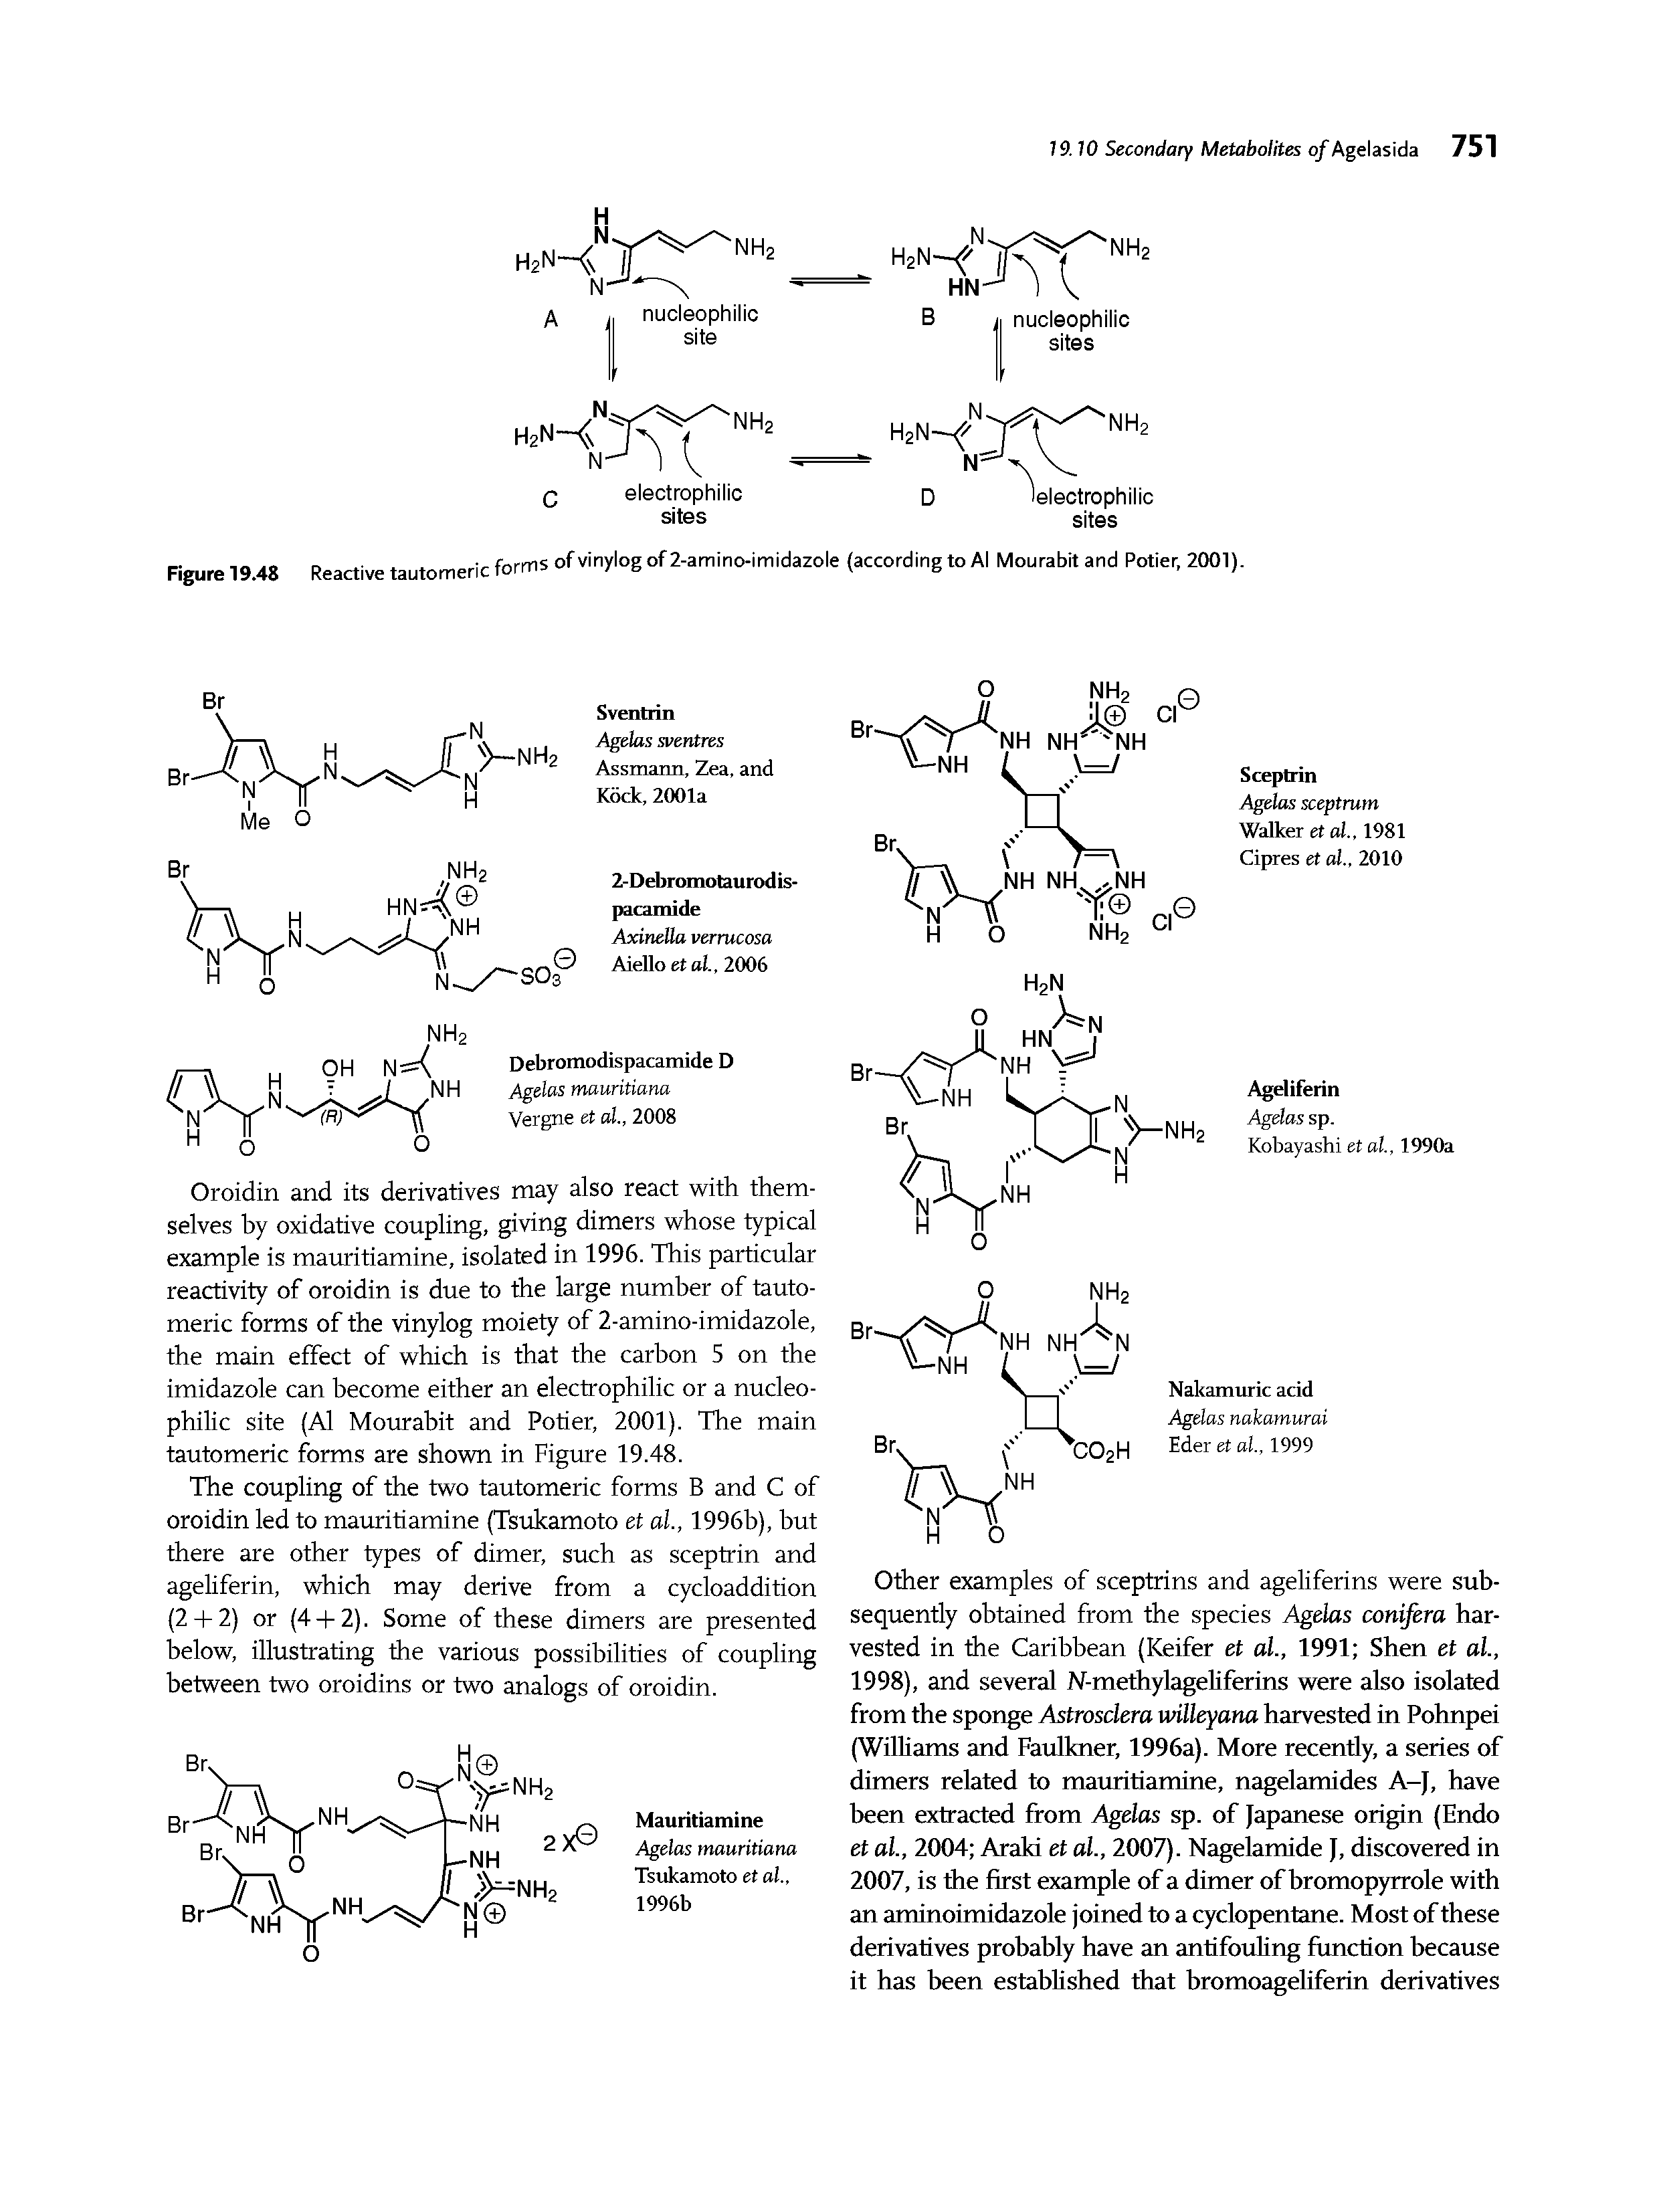 Figure 19.48 Reactive tautomeric forms of vinylog of 2-amino-imidazole (according to Al Mourabit and Potier 2001).